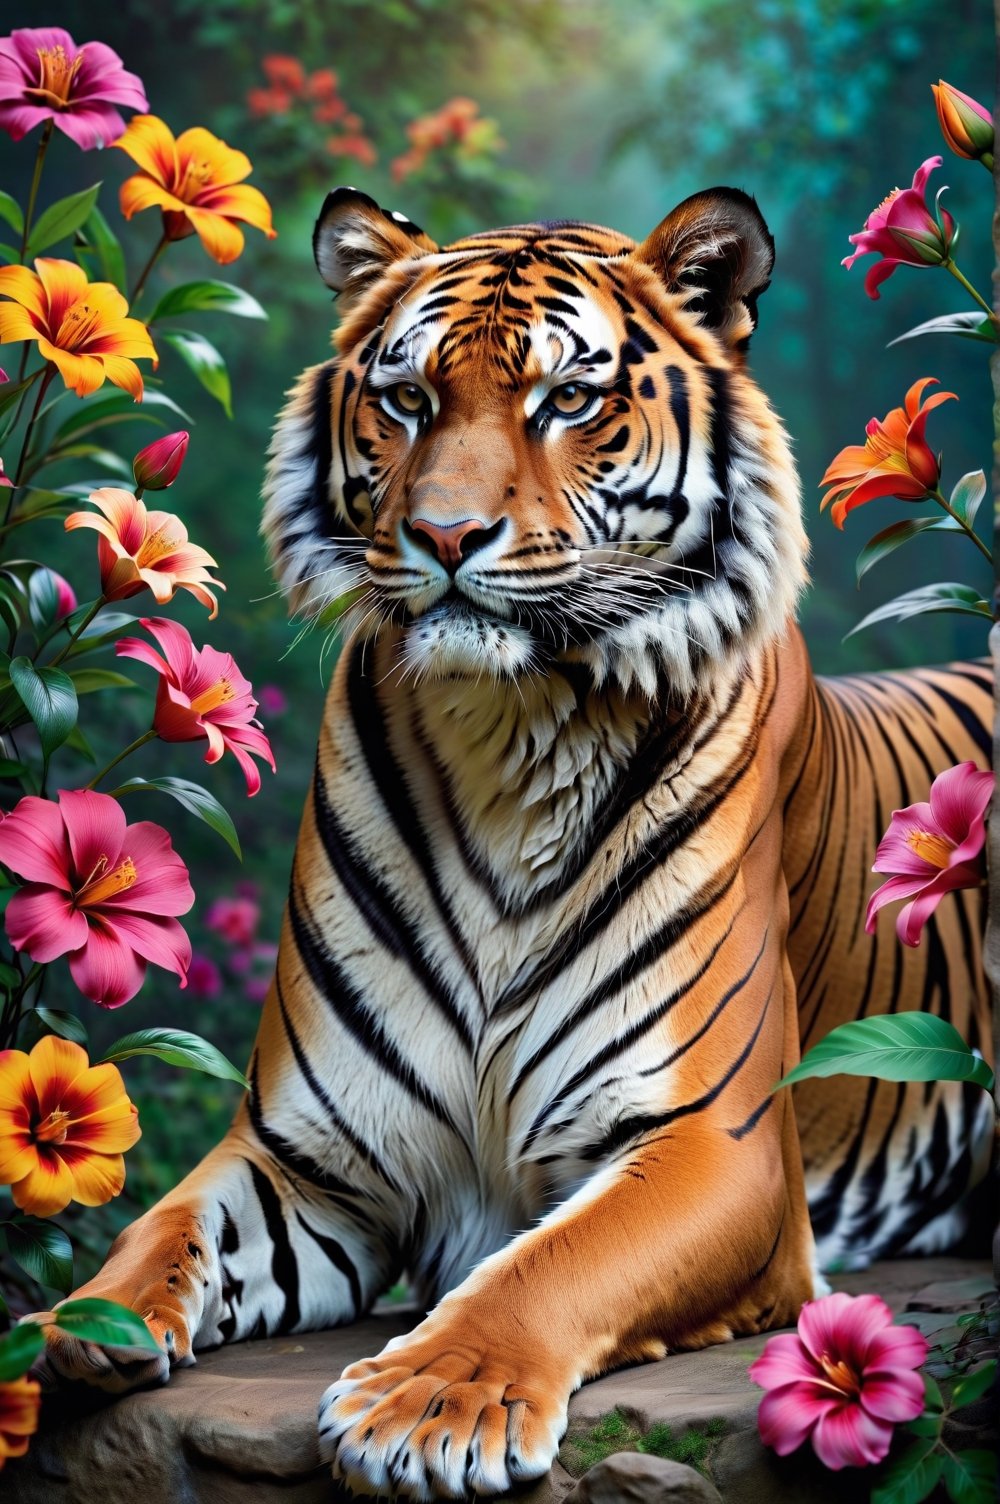 Close-up of majestic tiger in graceful pose in three-quarter view, colorful flowers around. Extremely realistic. A memorable photo.